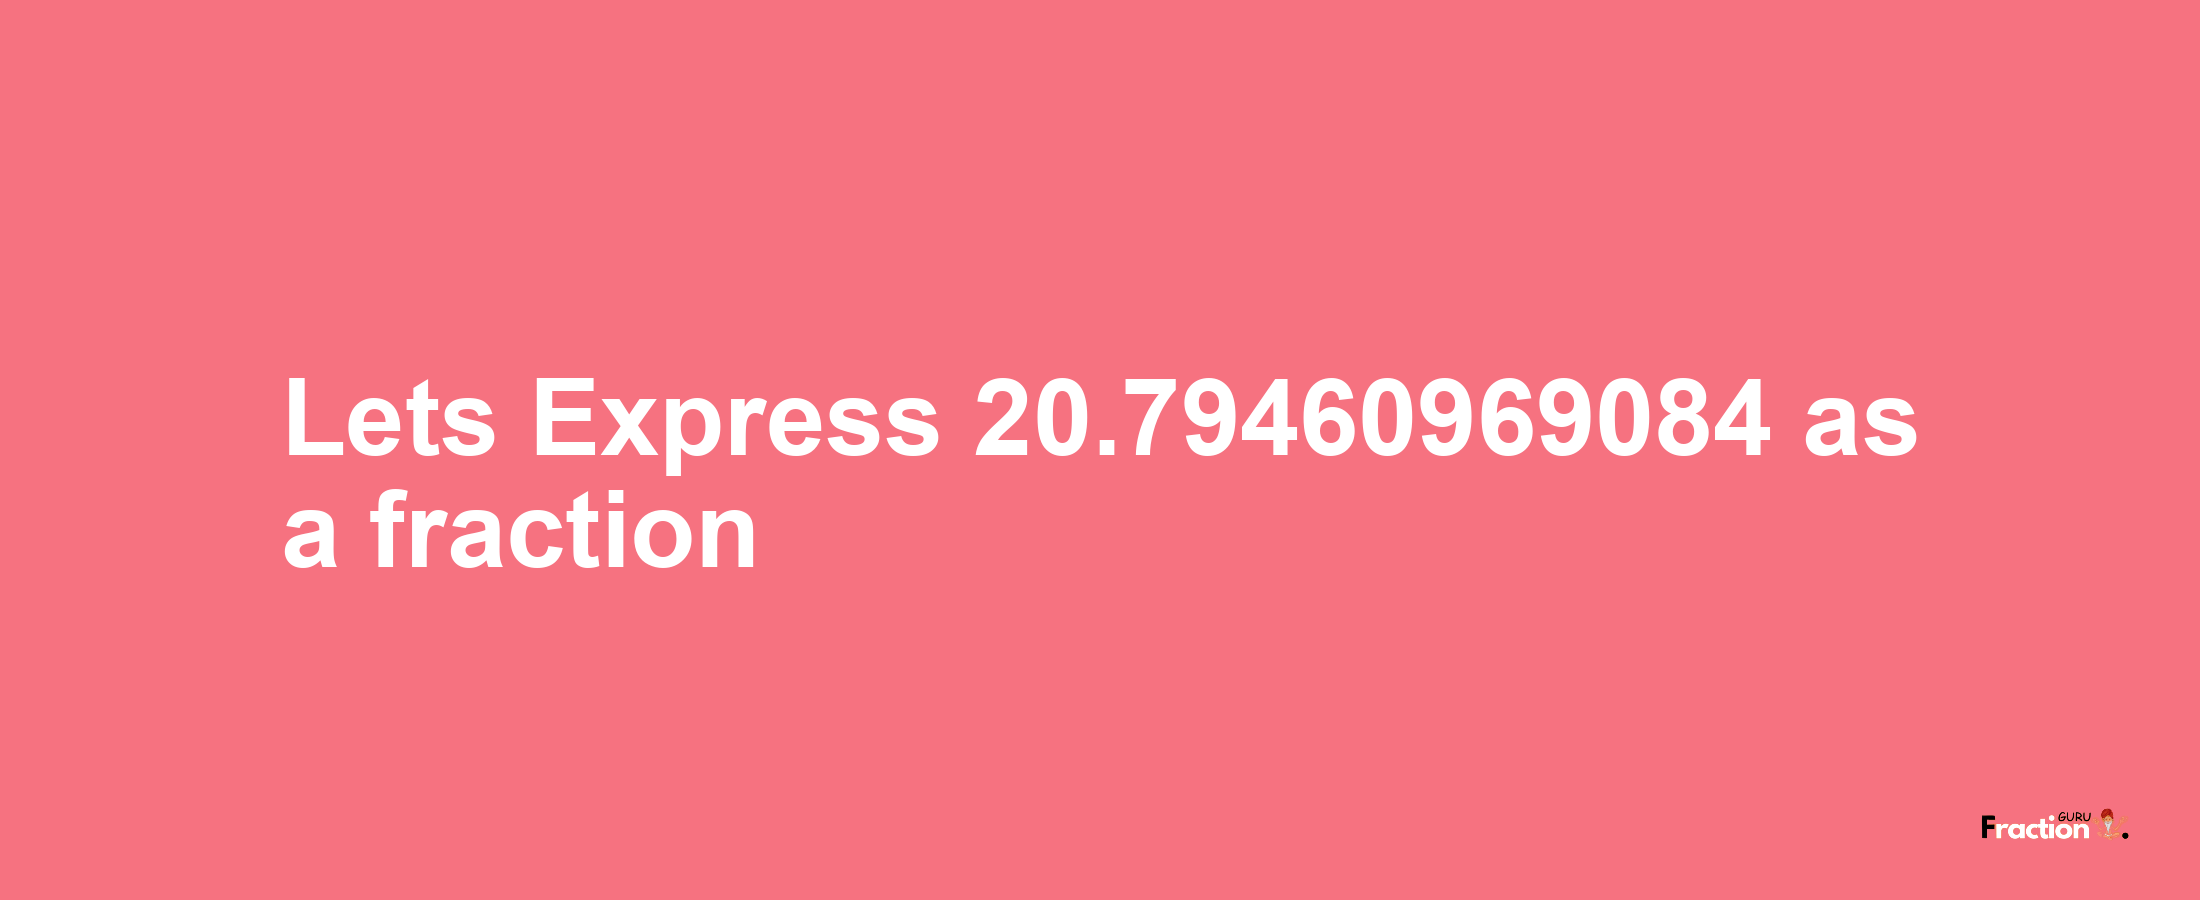 Lets Express 20.79460969084 as afraction